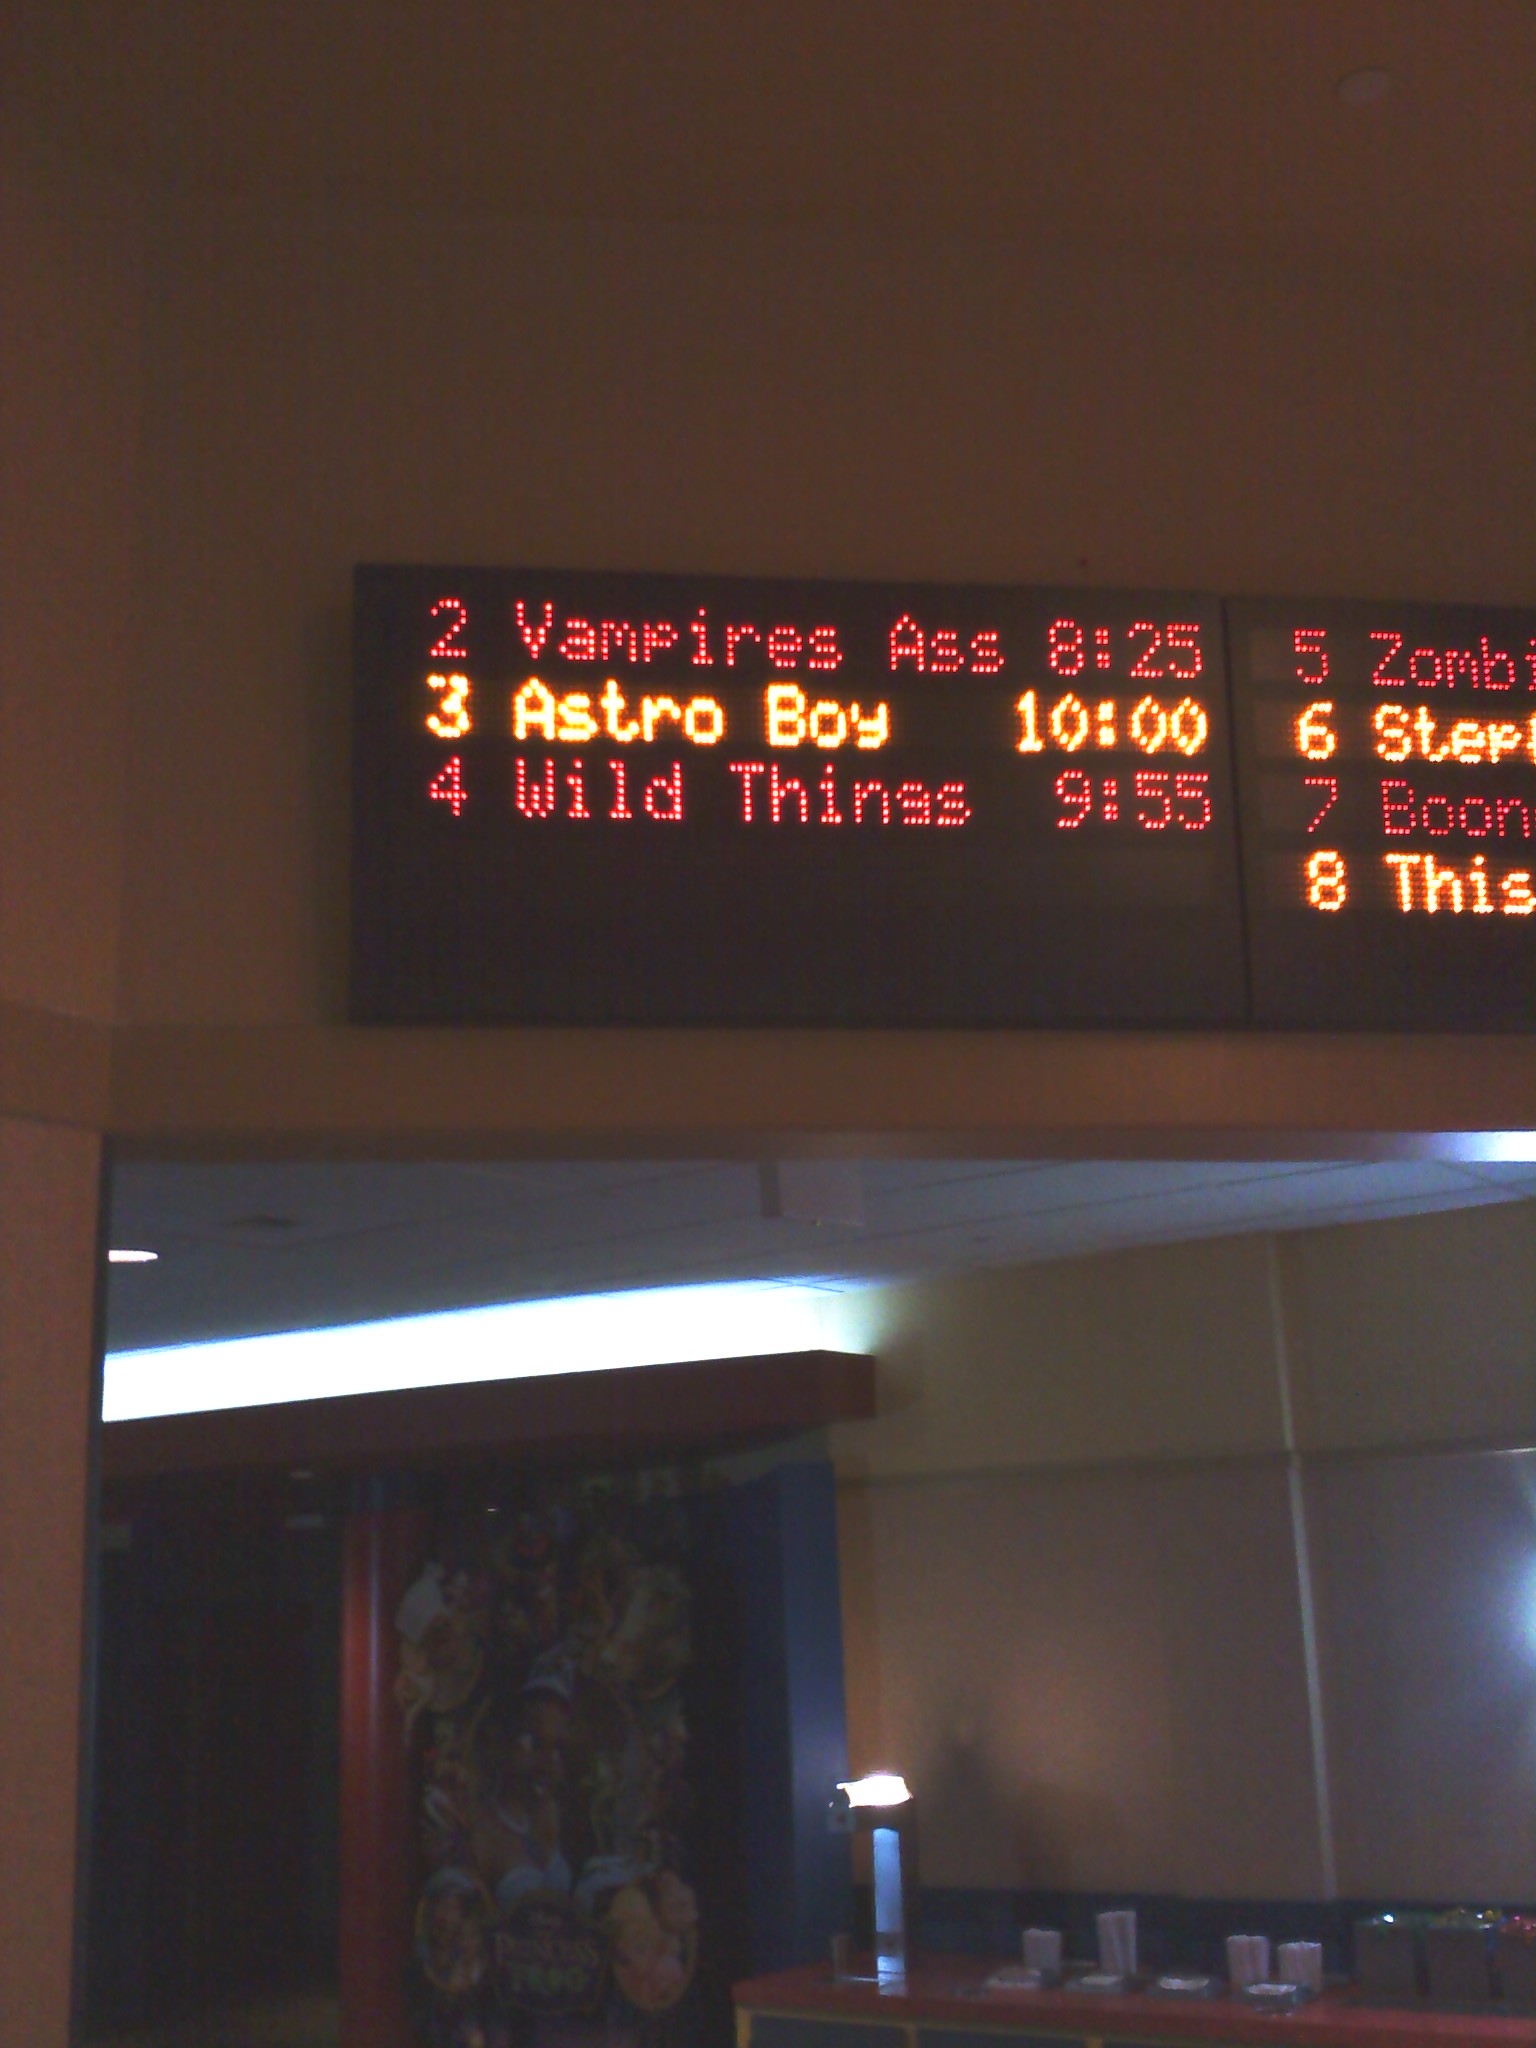 On my way to see The Boondock Saints II: All Saints Day, my friends and I noticed this sign...

